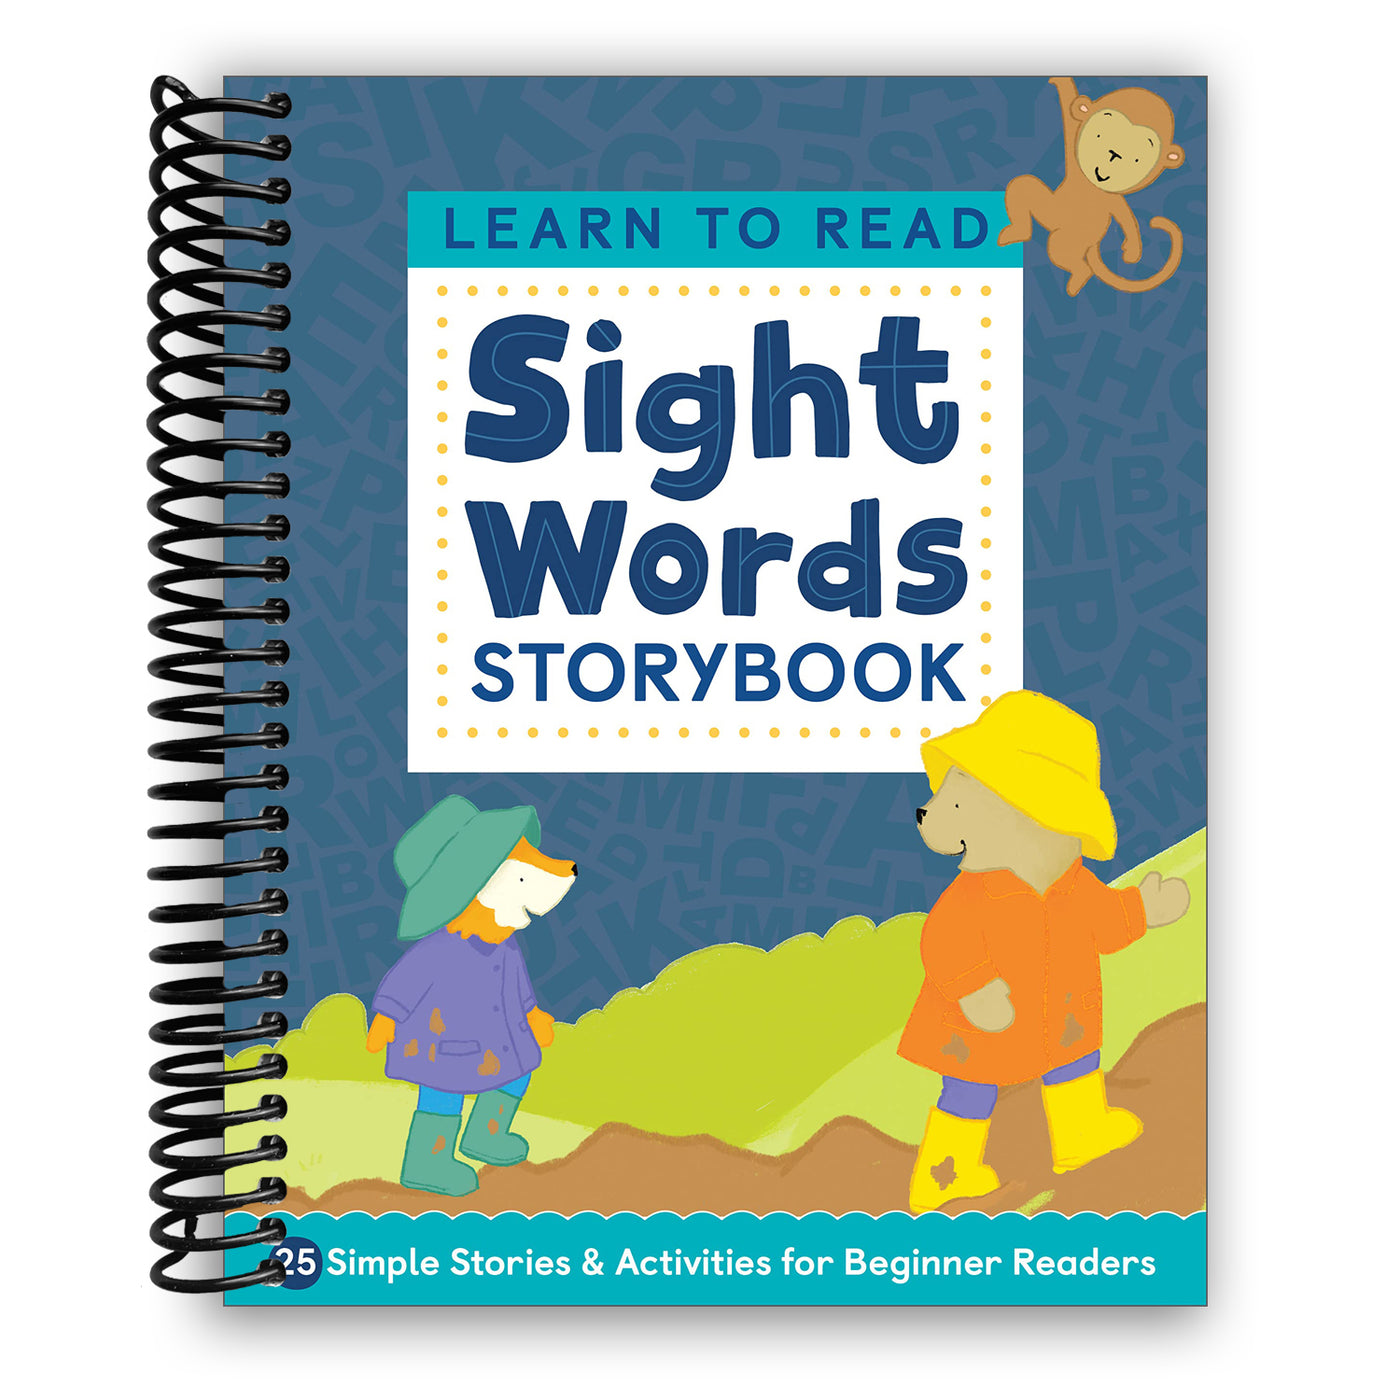 Learn to Read: Sight Words Storybook: 25 Simple Stories & Activities for Beginner Readers (Spiral Bound)